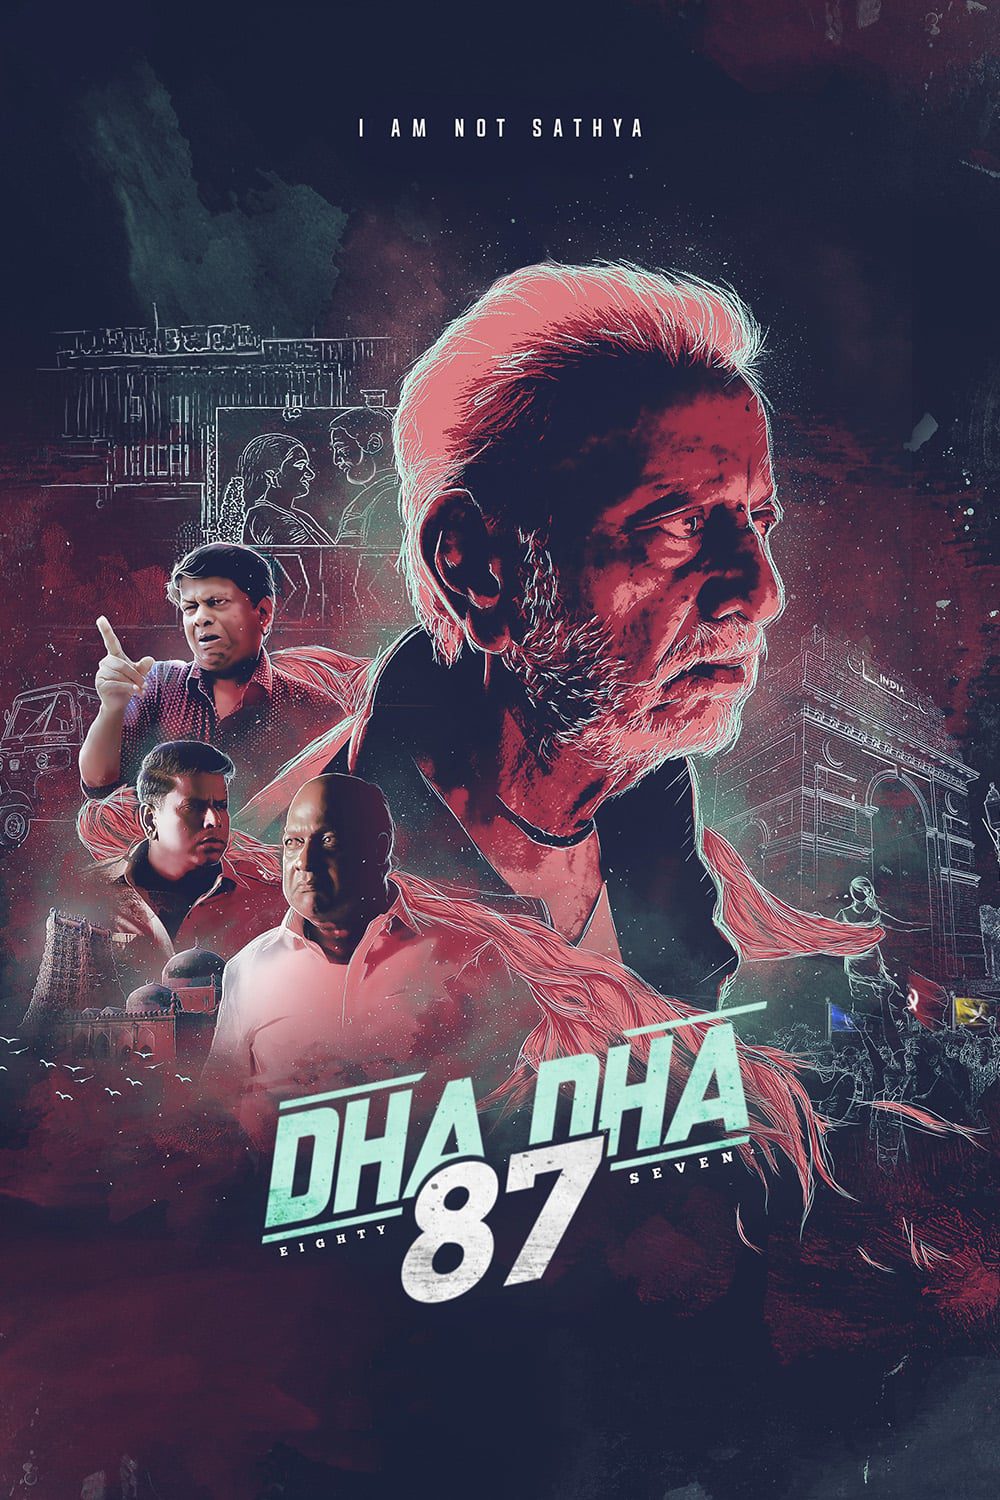 Poster for the movie "Dha Dha 87"